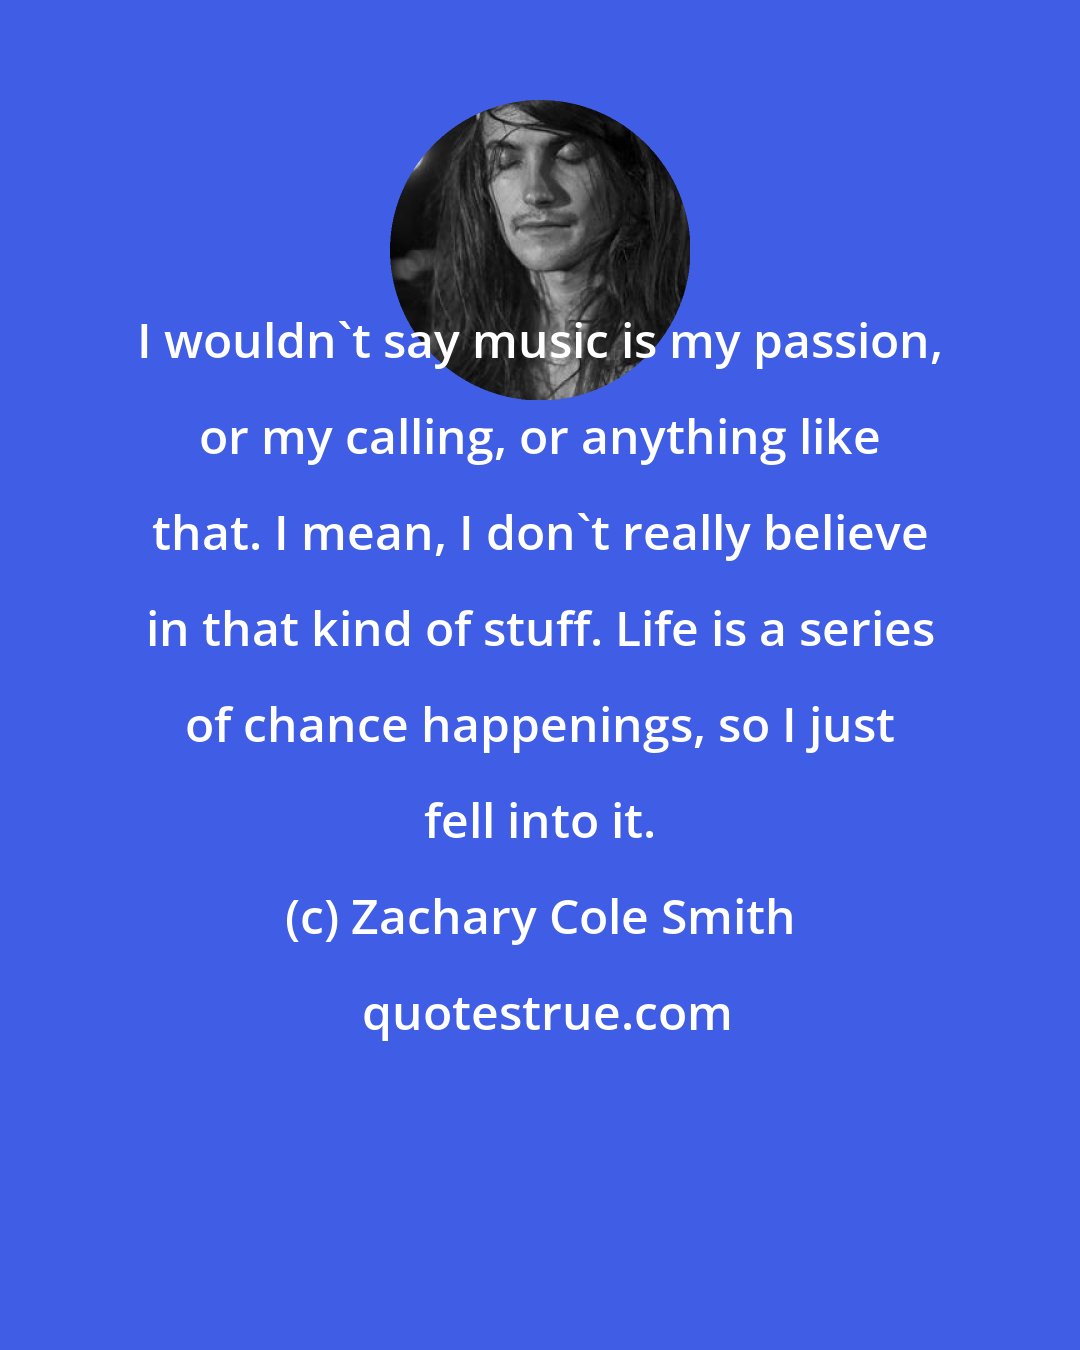 Zachary Cole Smith: I wouldn't say music is my passion, or my calling, or anything like that. I mean, I don't really believe in that kind of stuff. Life is a series of chance happenings, so I just fell into it.